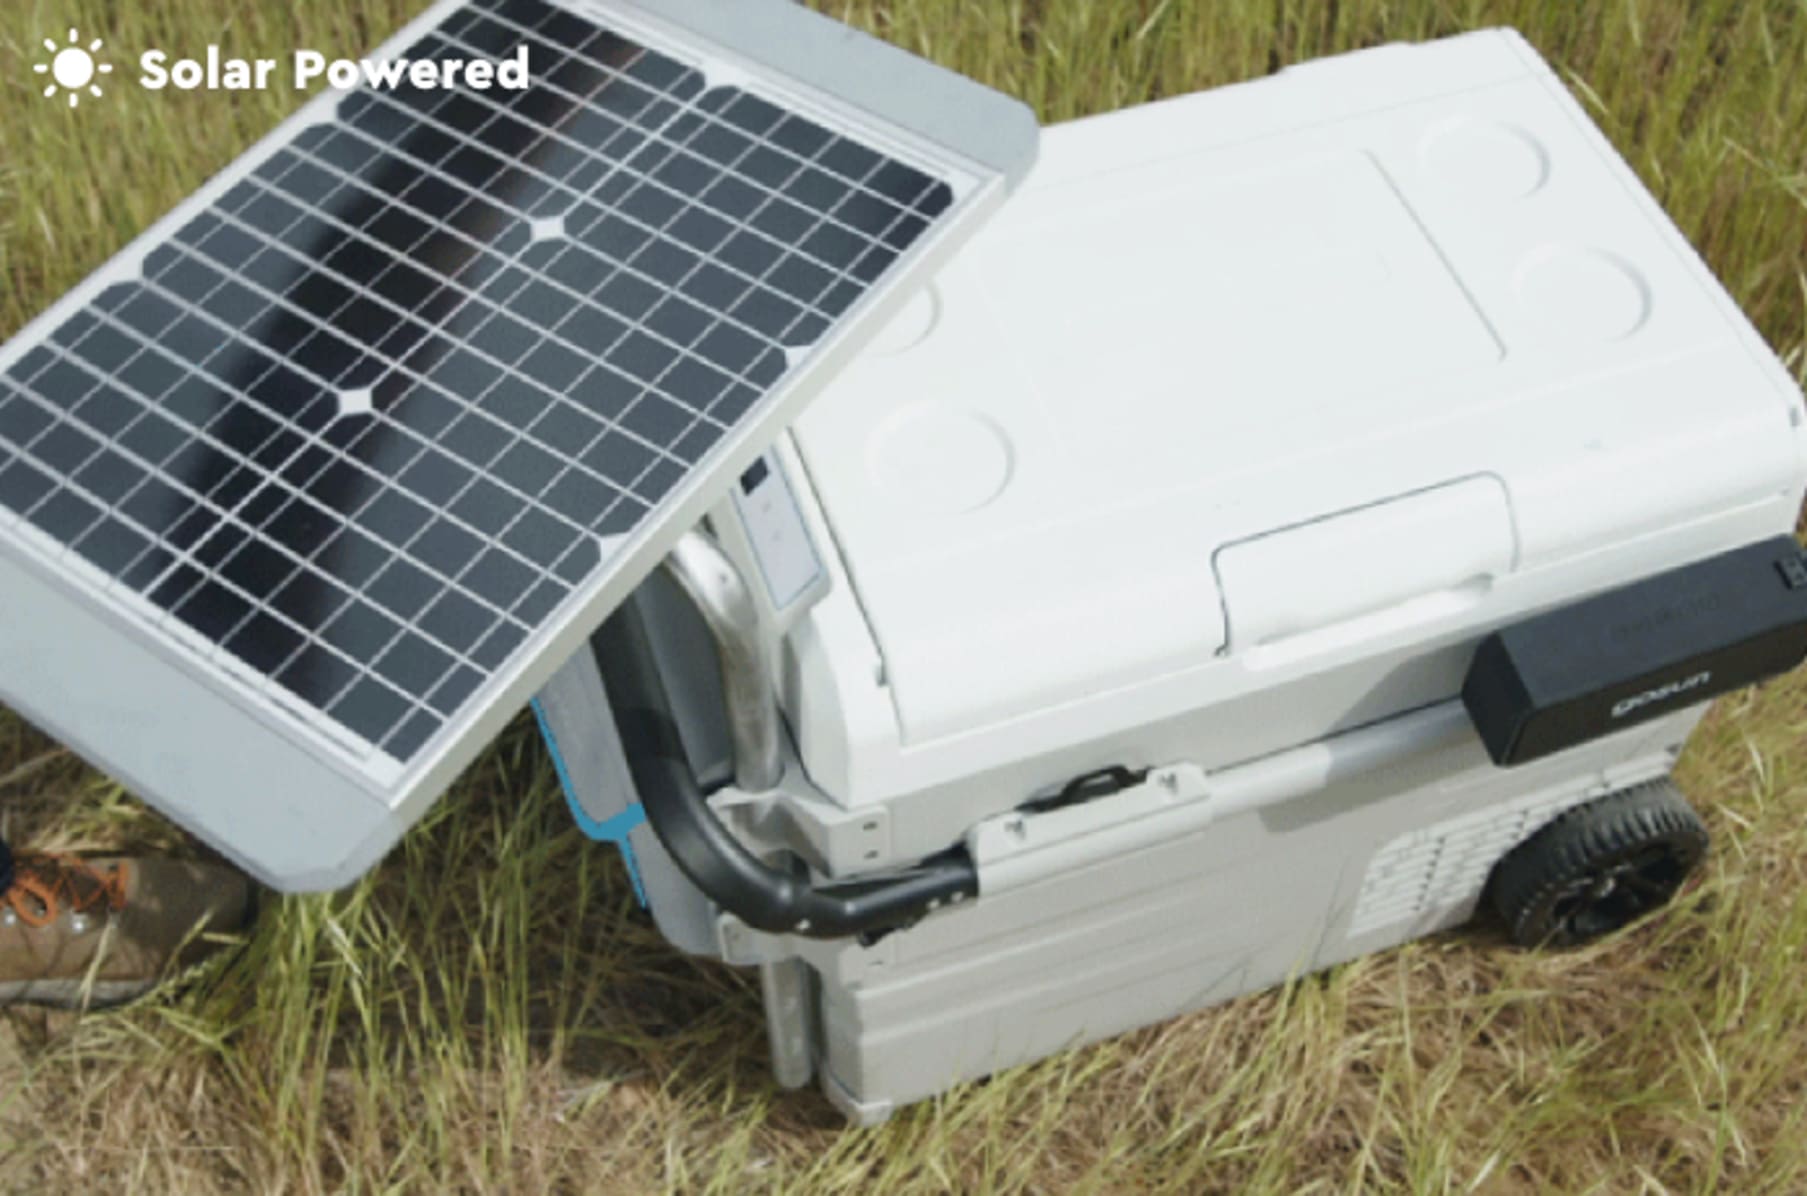 Social studies Correspondent Discourse GoSun Chillest: Solar Cooler That Doesn't Need Ice | Indiegogo